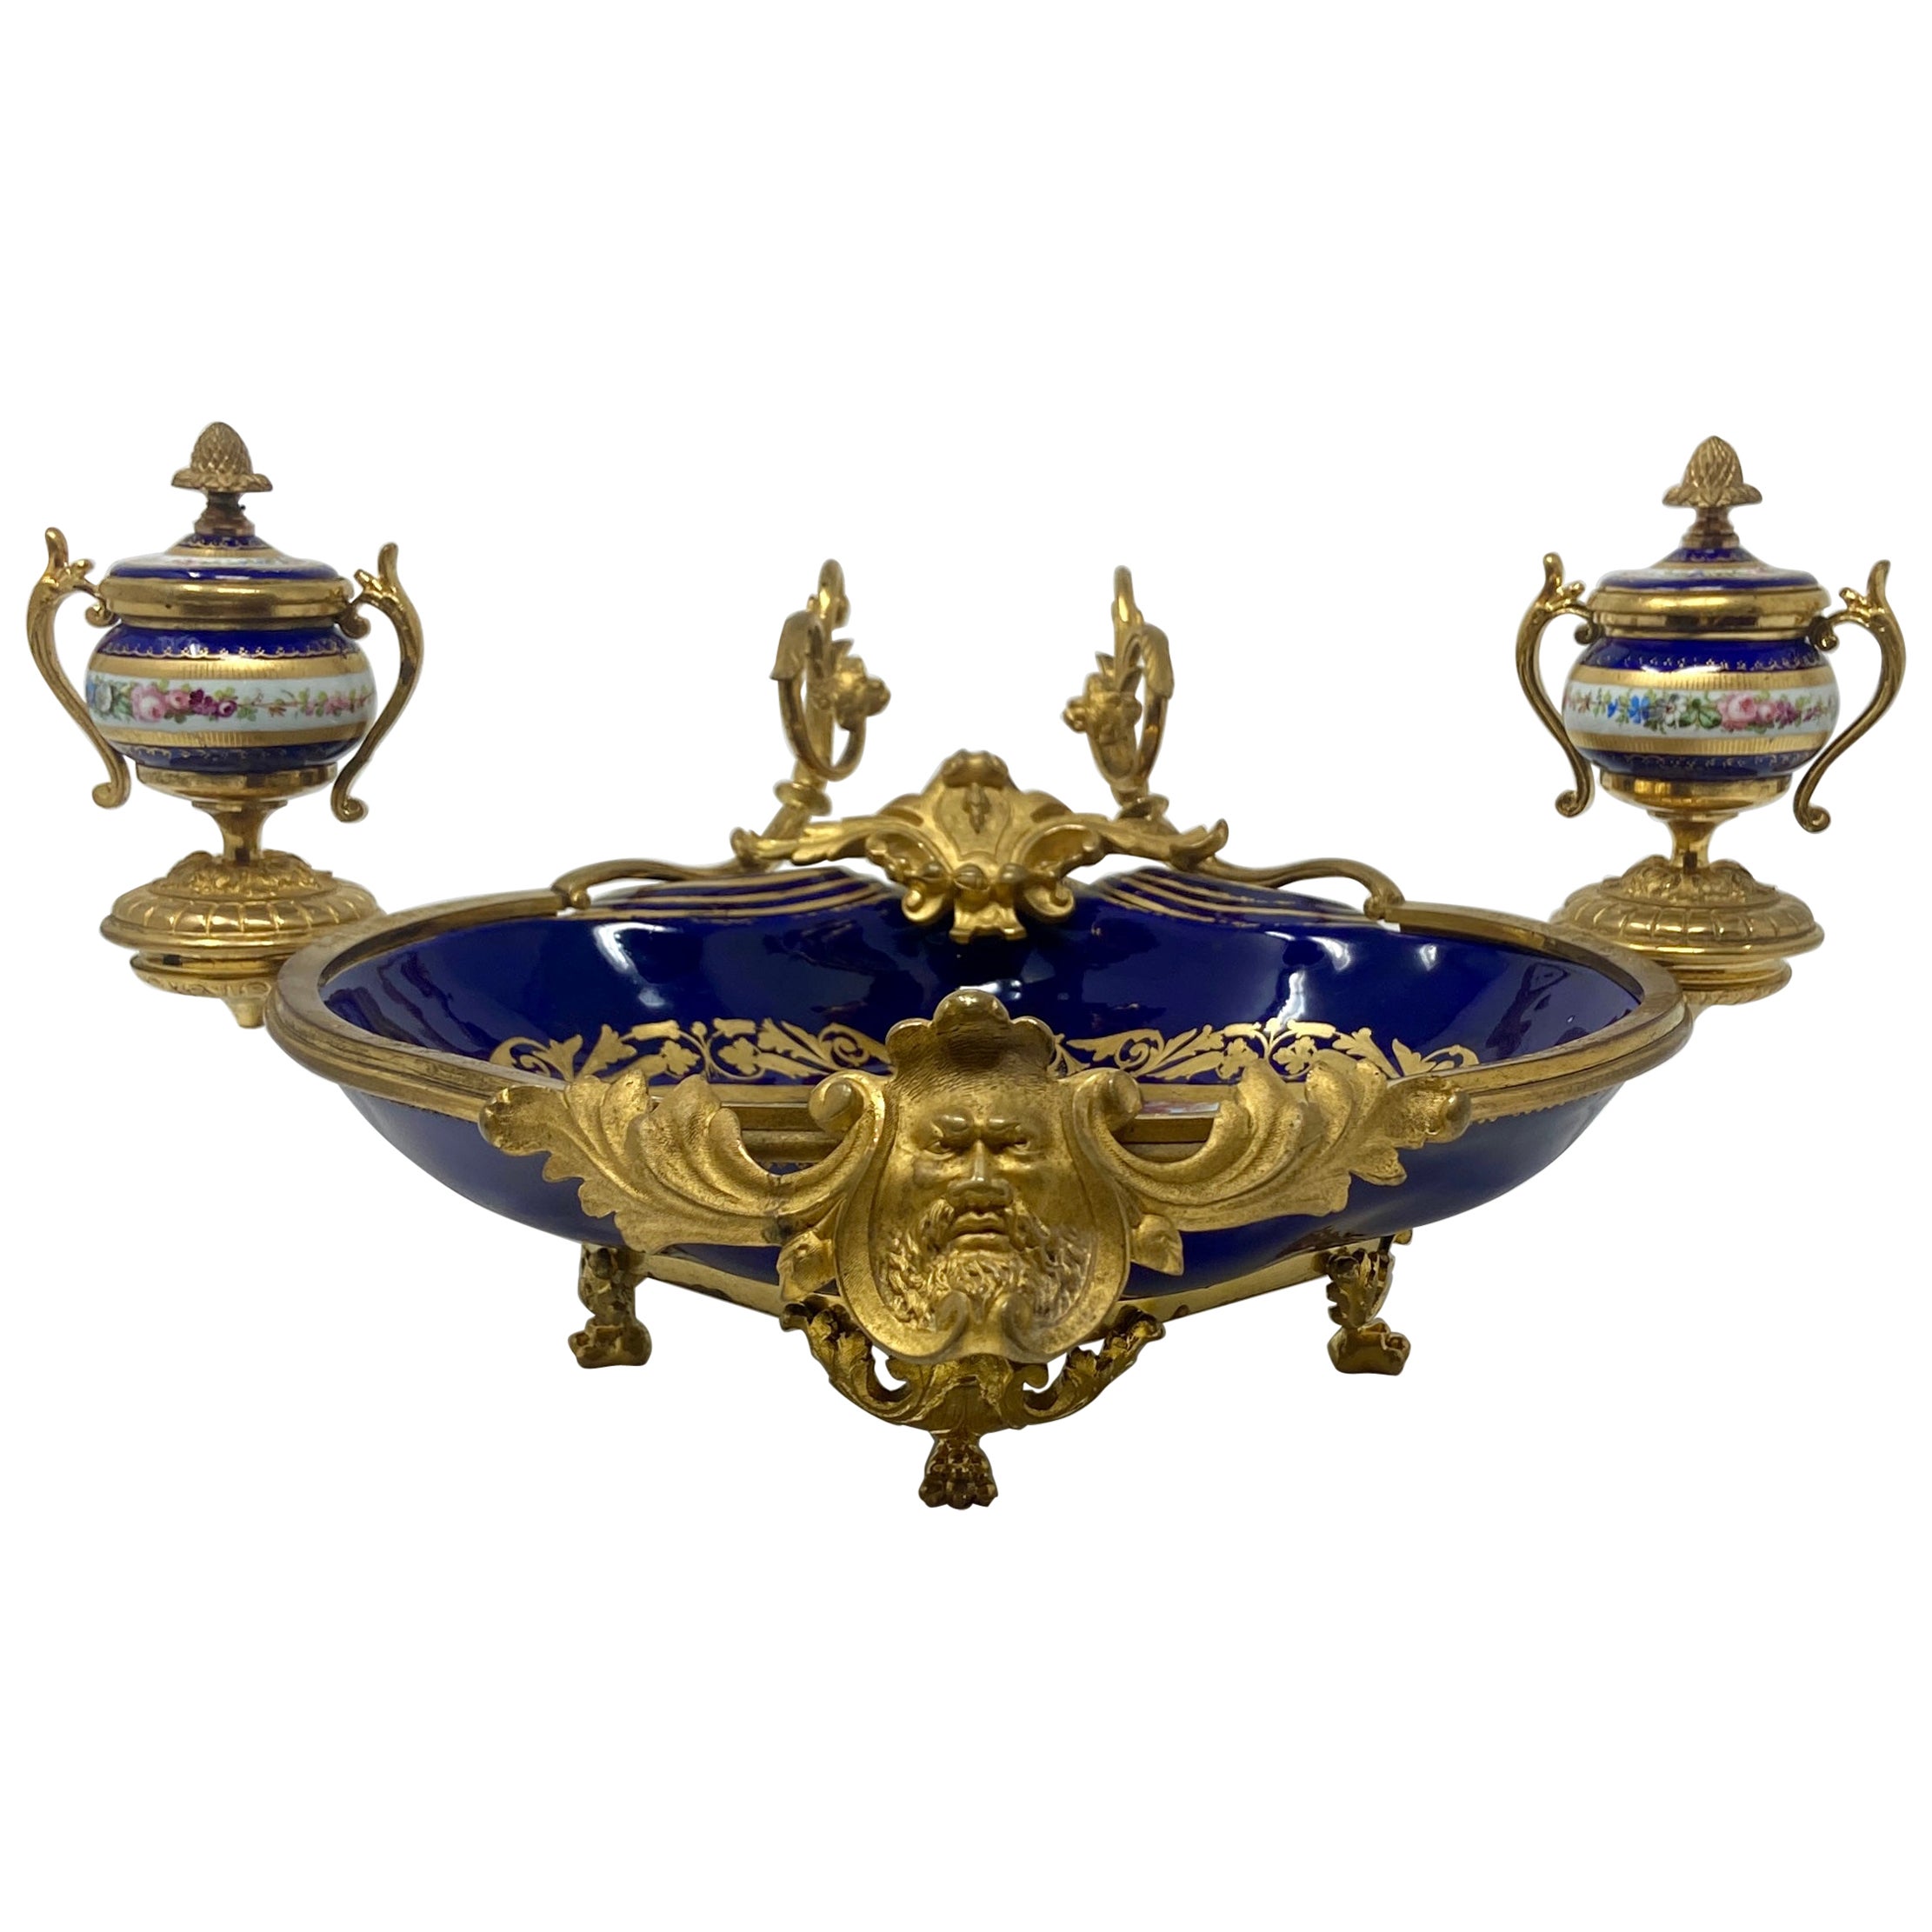 Antique French Ormolu Mounted Blue "Sevres" Porcelain Inkwell, Circa 1860-1880.